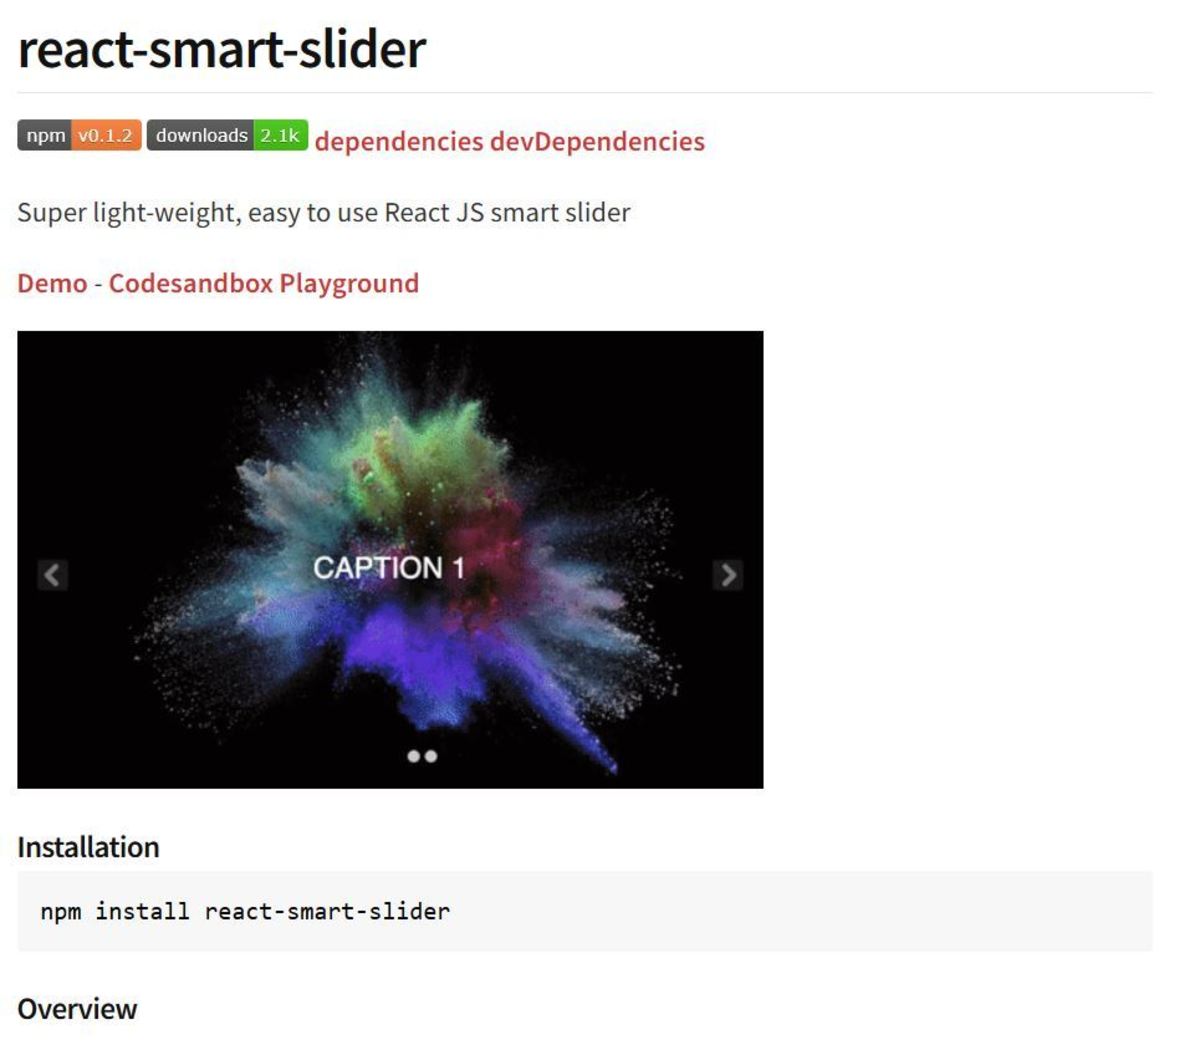 React Smart Slider is an NPM package that provides slideshow functionality.